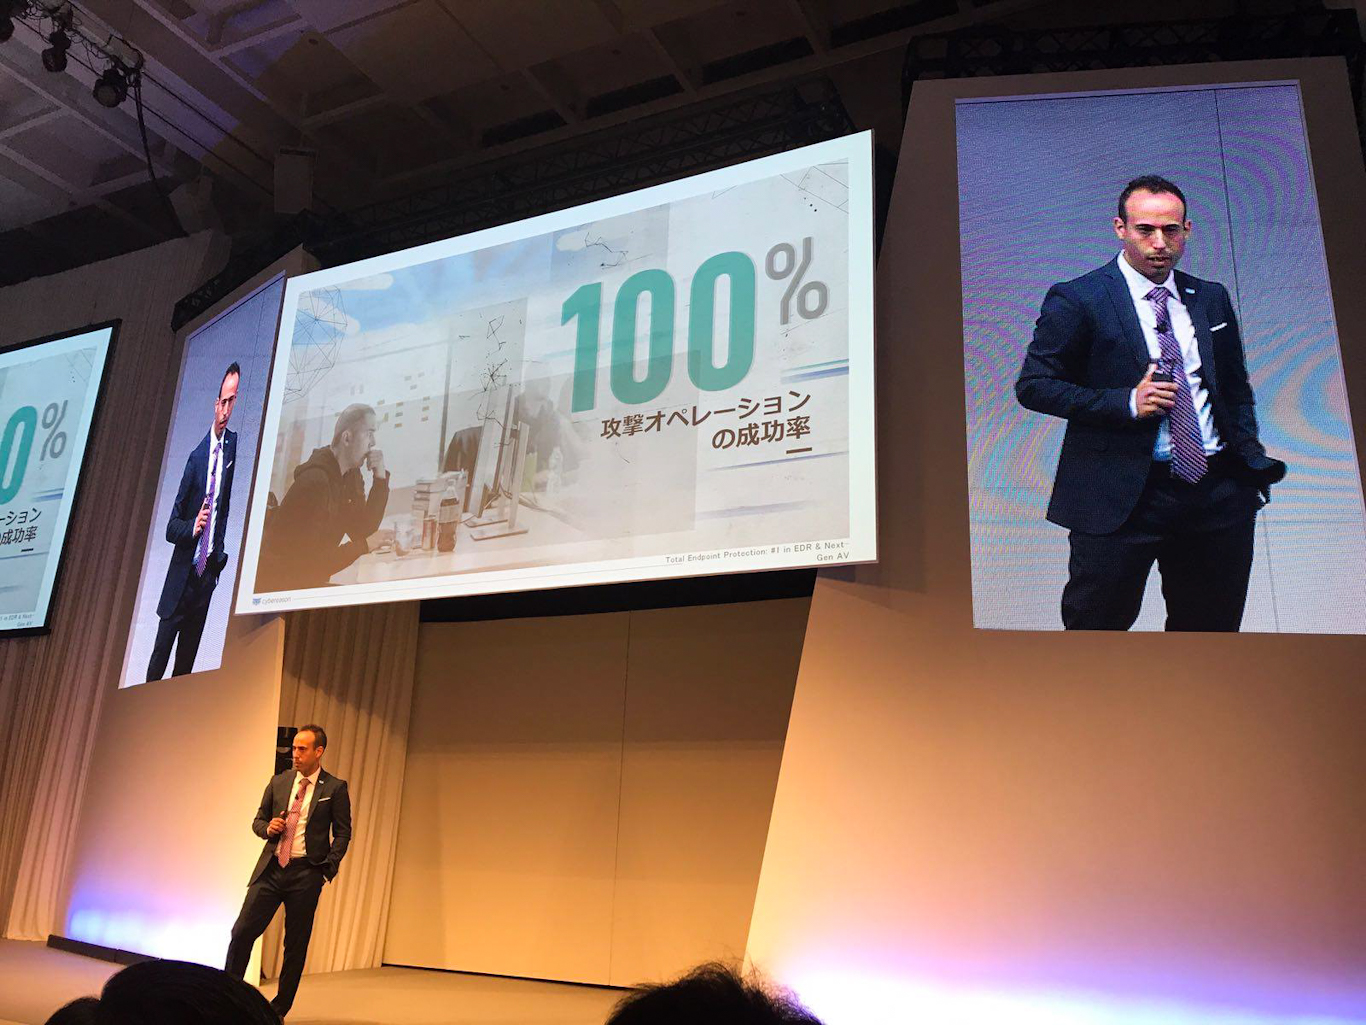 Cybereason CEO Lior Div speaks at a SoftBank event in Japan, July 21, 2017. Photo | Cybereason